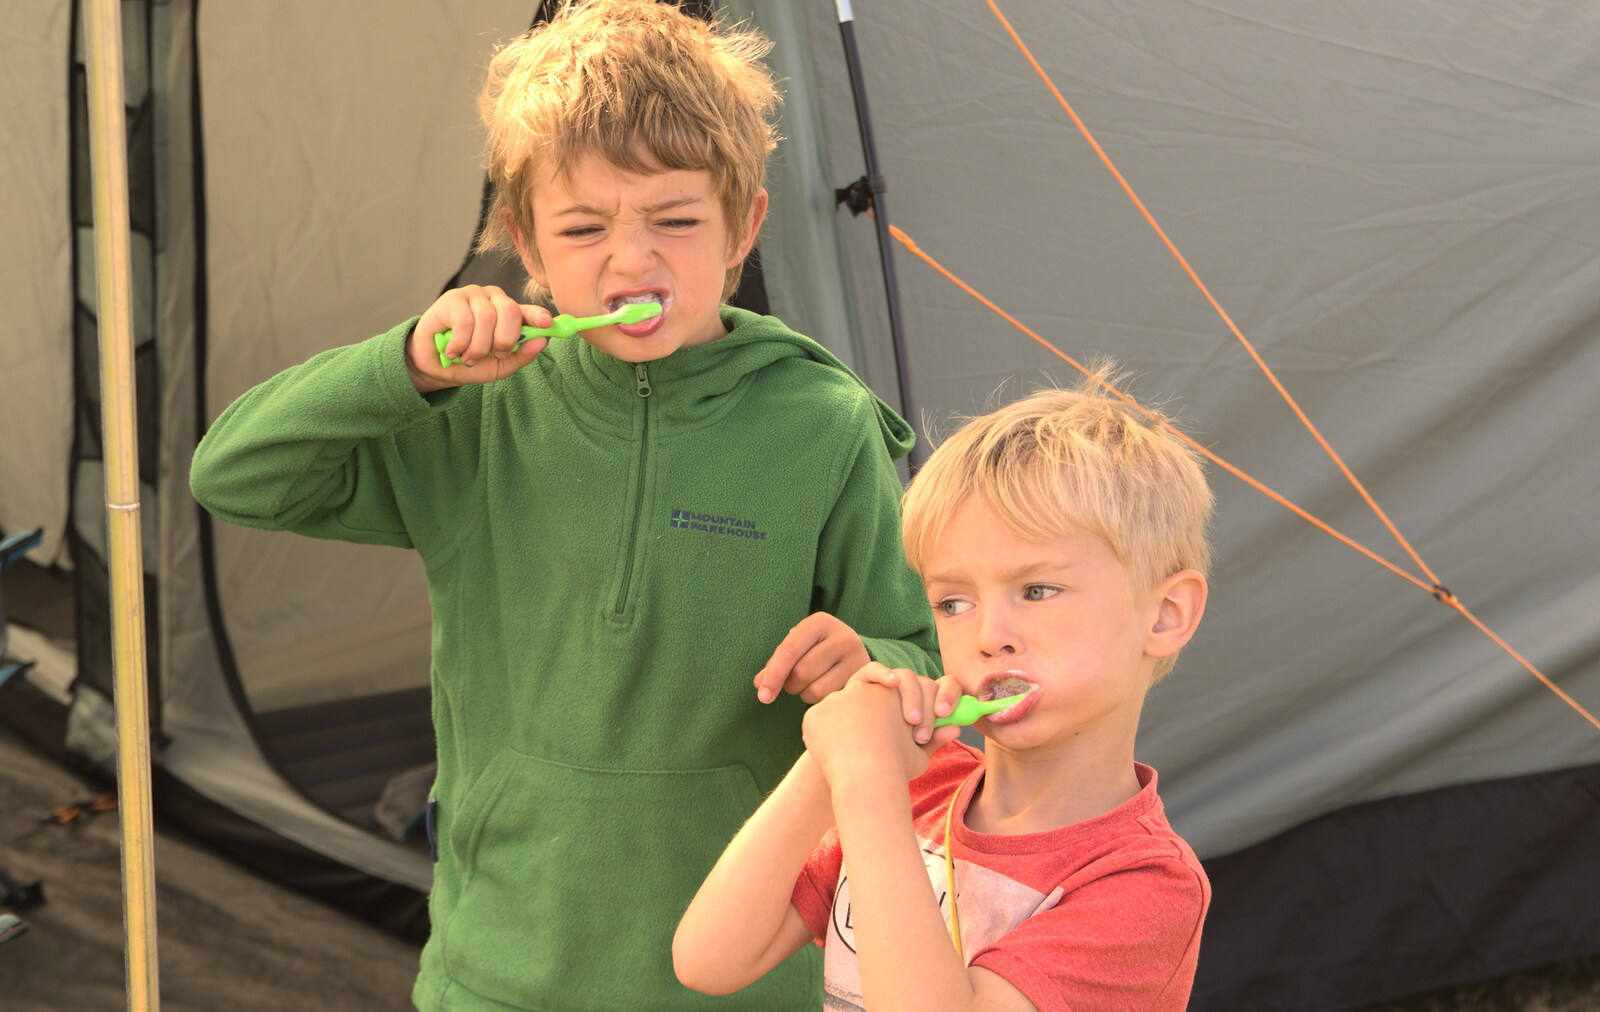 The boys angrily brush their teeth from Camping With Sean, Ashburton, Devon - 8th August 2016